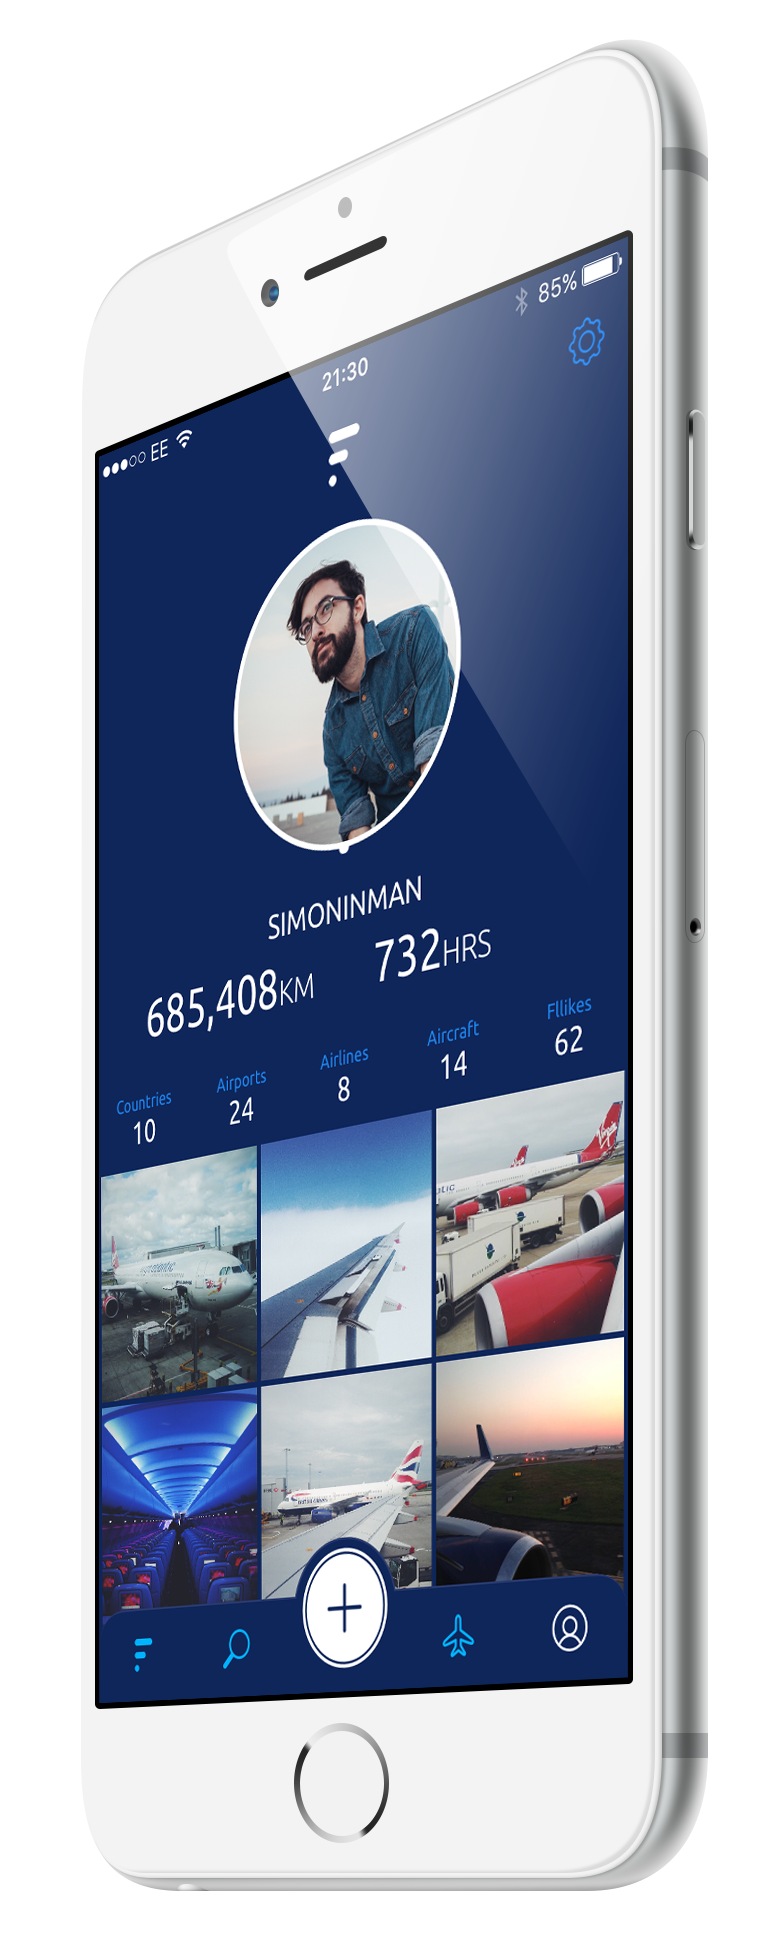 fllike helps you share your flight experience with others